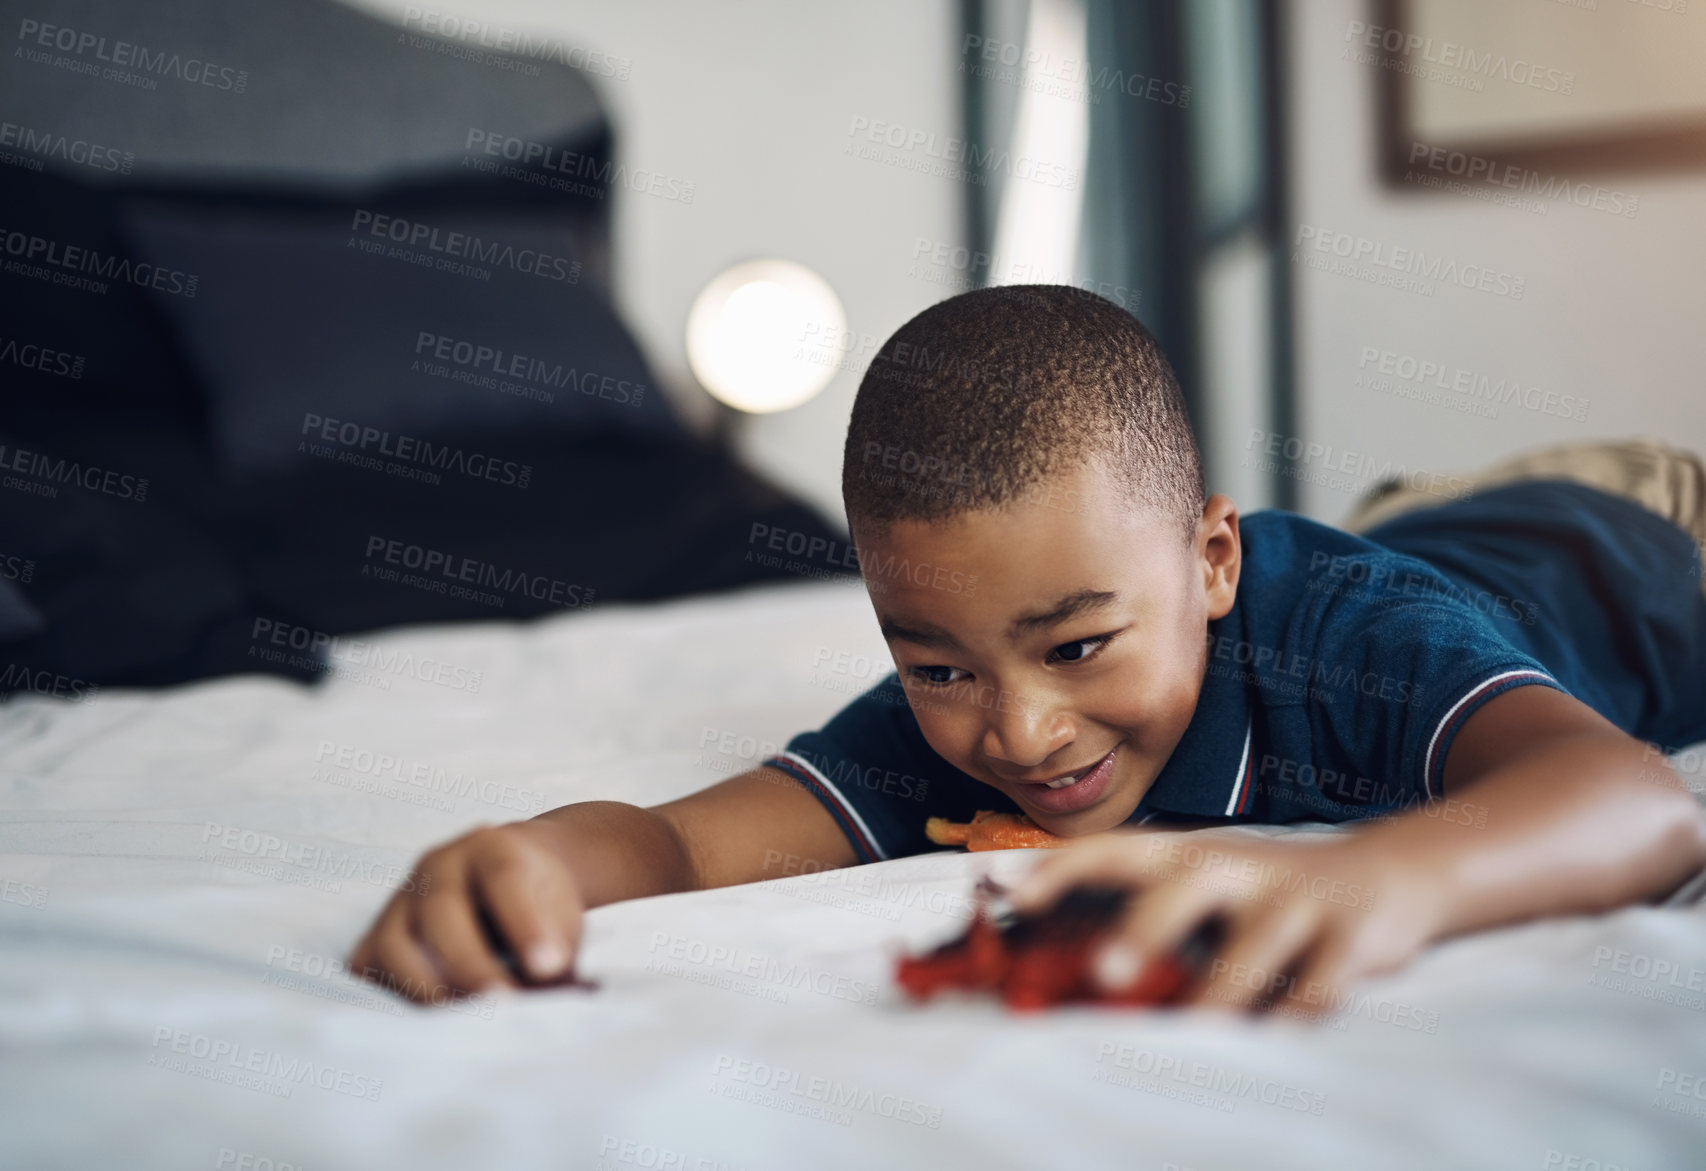 Buy stock photo Cropped shot of an unrecognizable boy playing with dinosaurs while lying on his bed